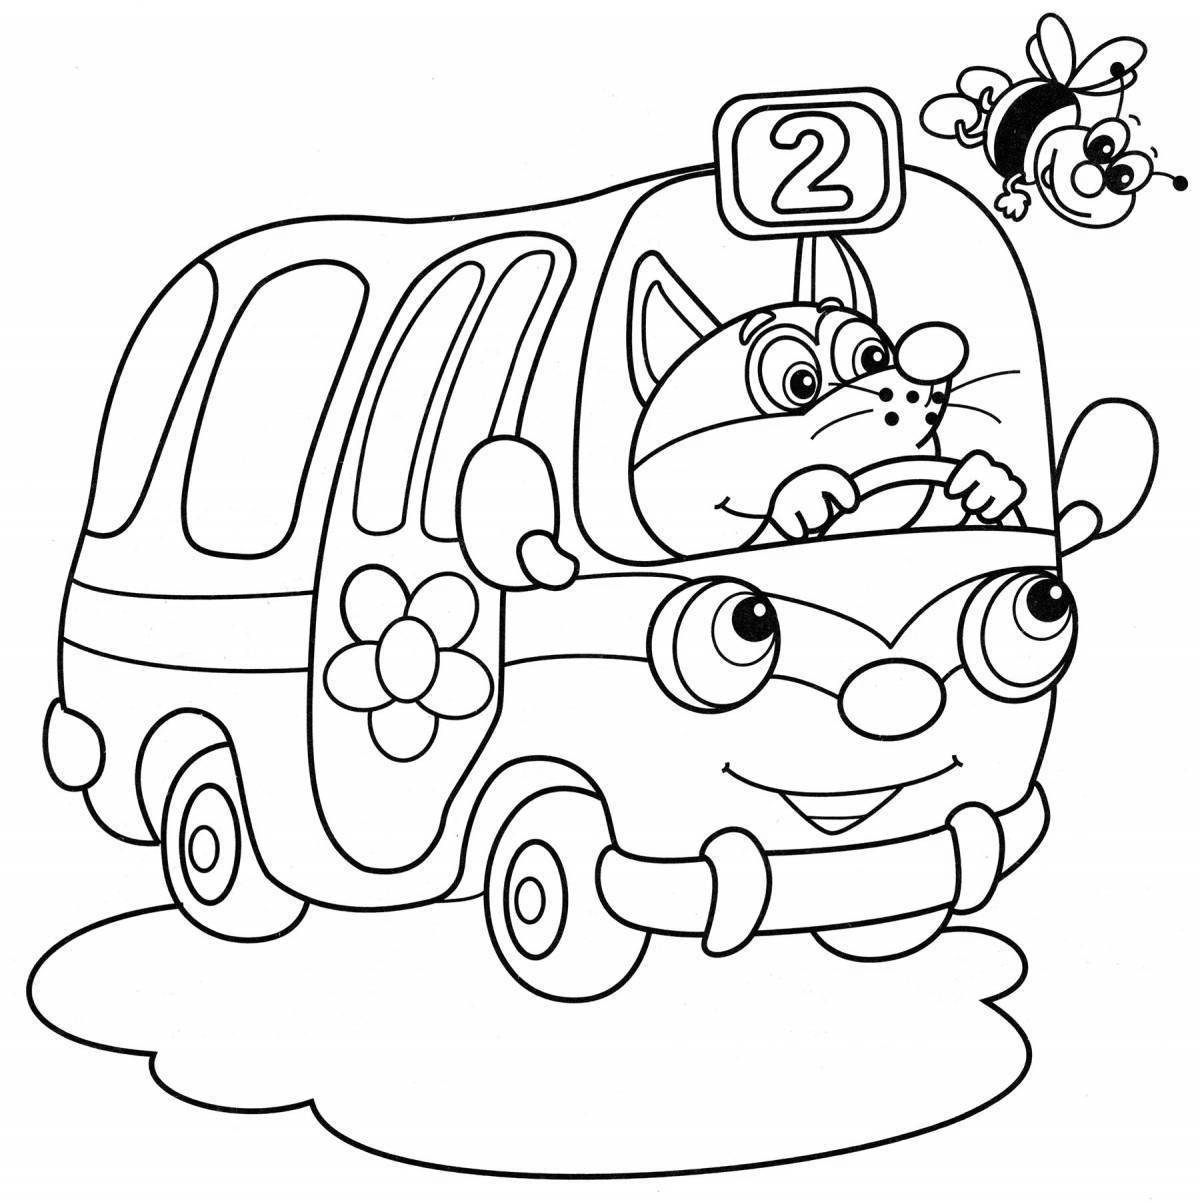 Coloring pages adorable cars for girls